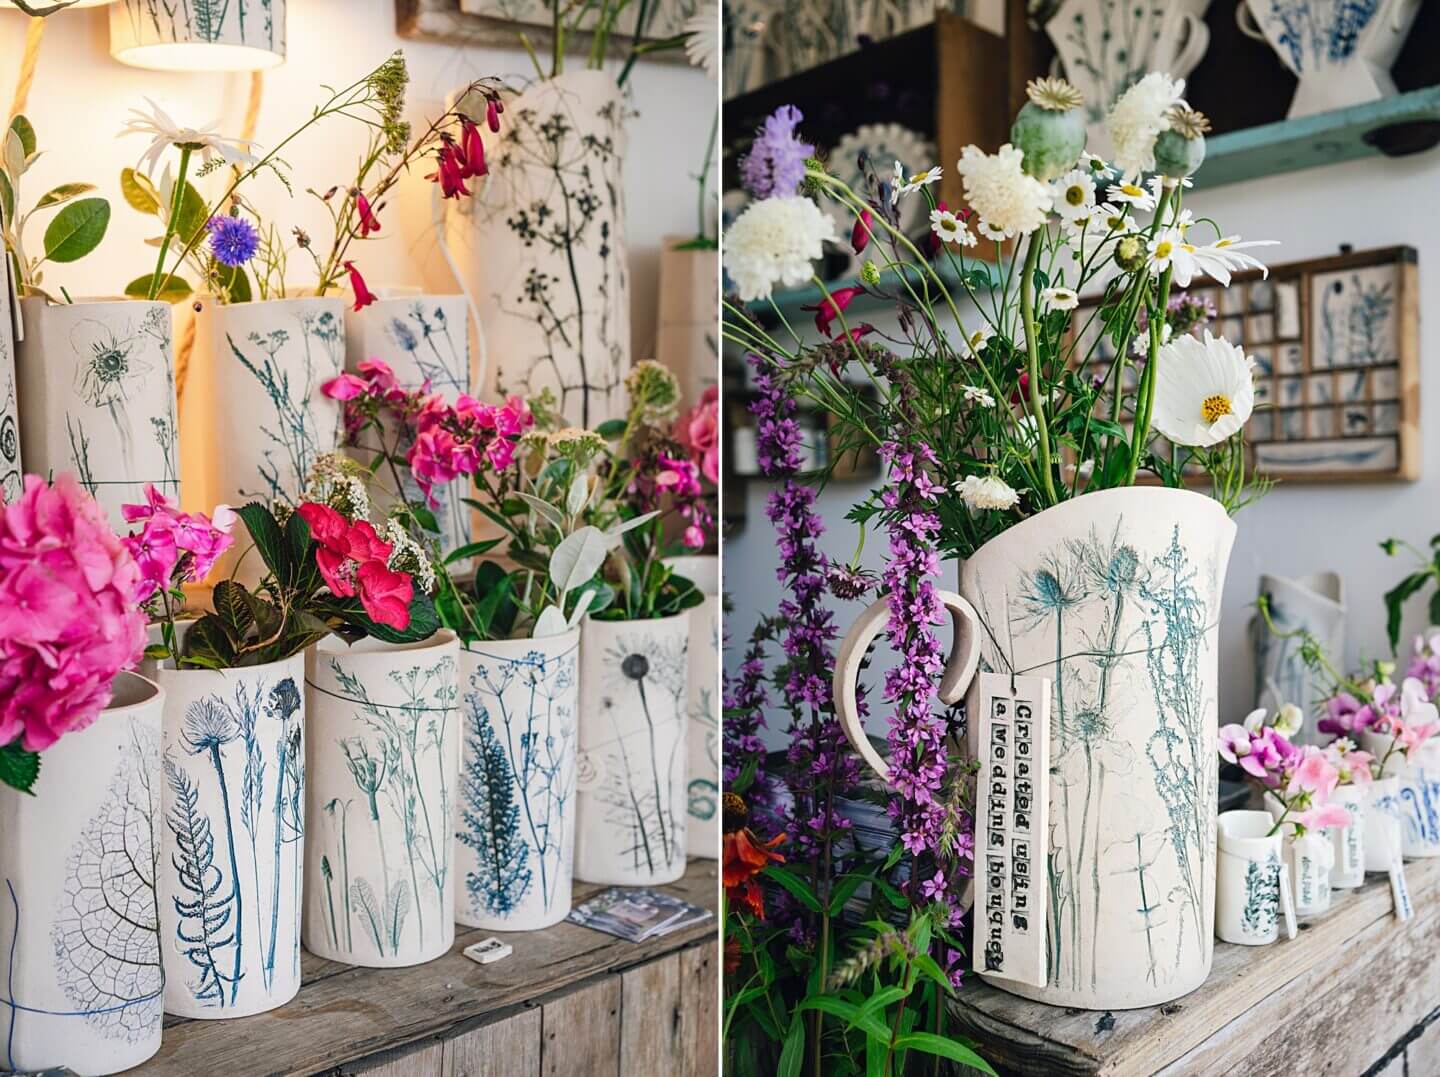 Jugs and vases on a trade stand at RHS Tatton Park by the Ceramic Botanist